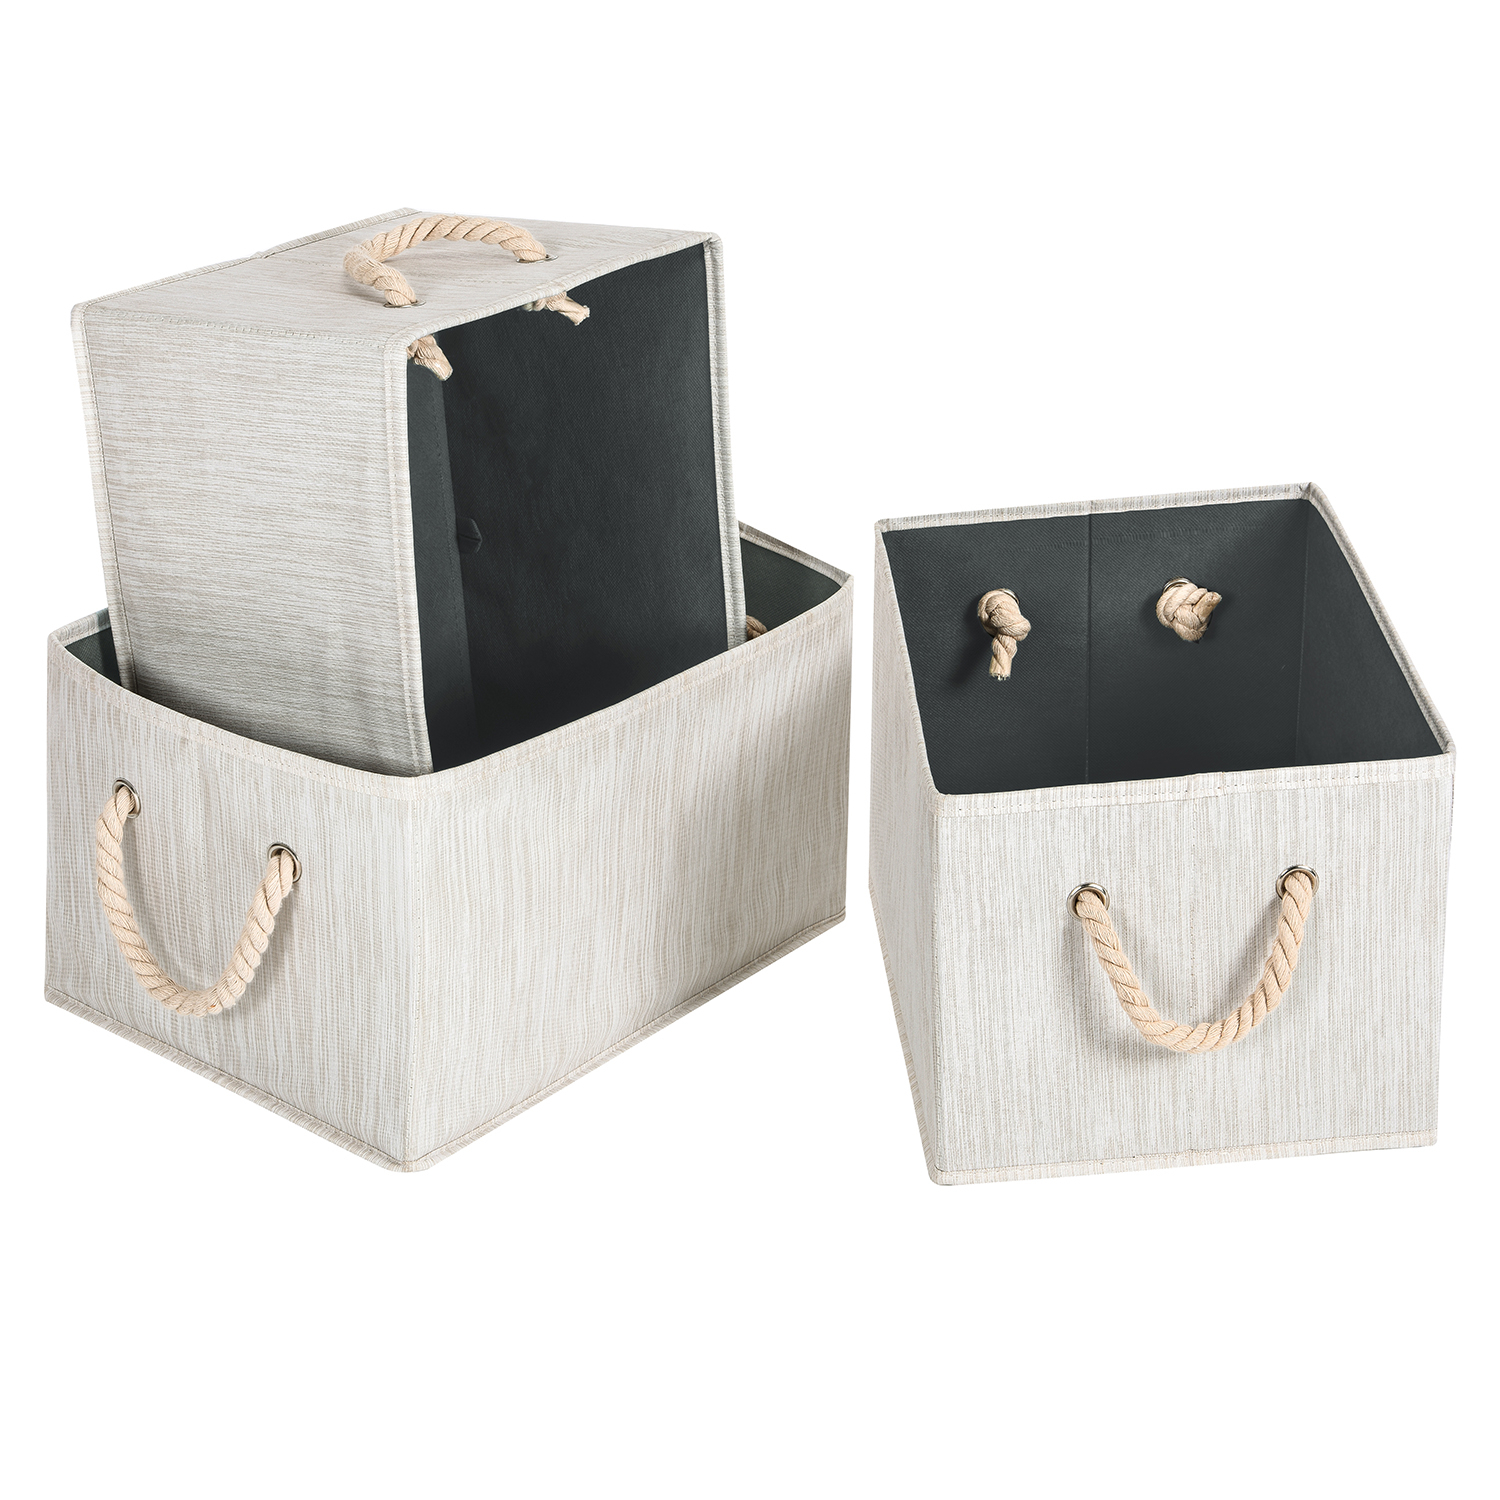 Maidmax Cloth Storage Bins With Two Cotton Ropes Each Bamboo Style within proportions 1500 X 1500